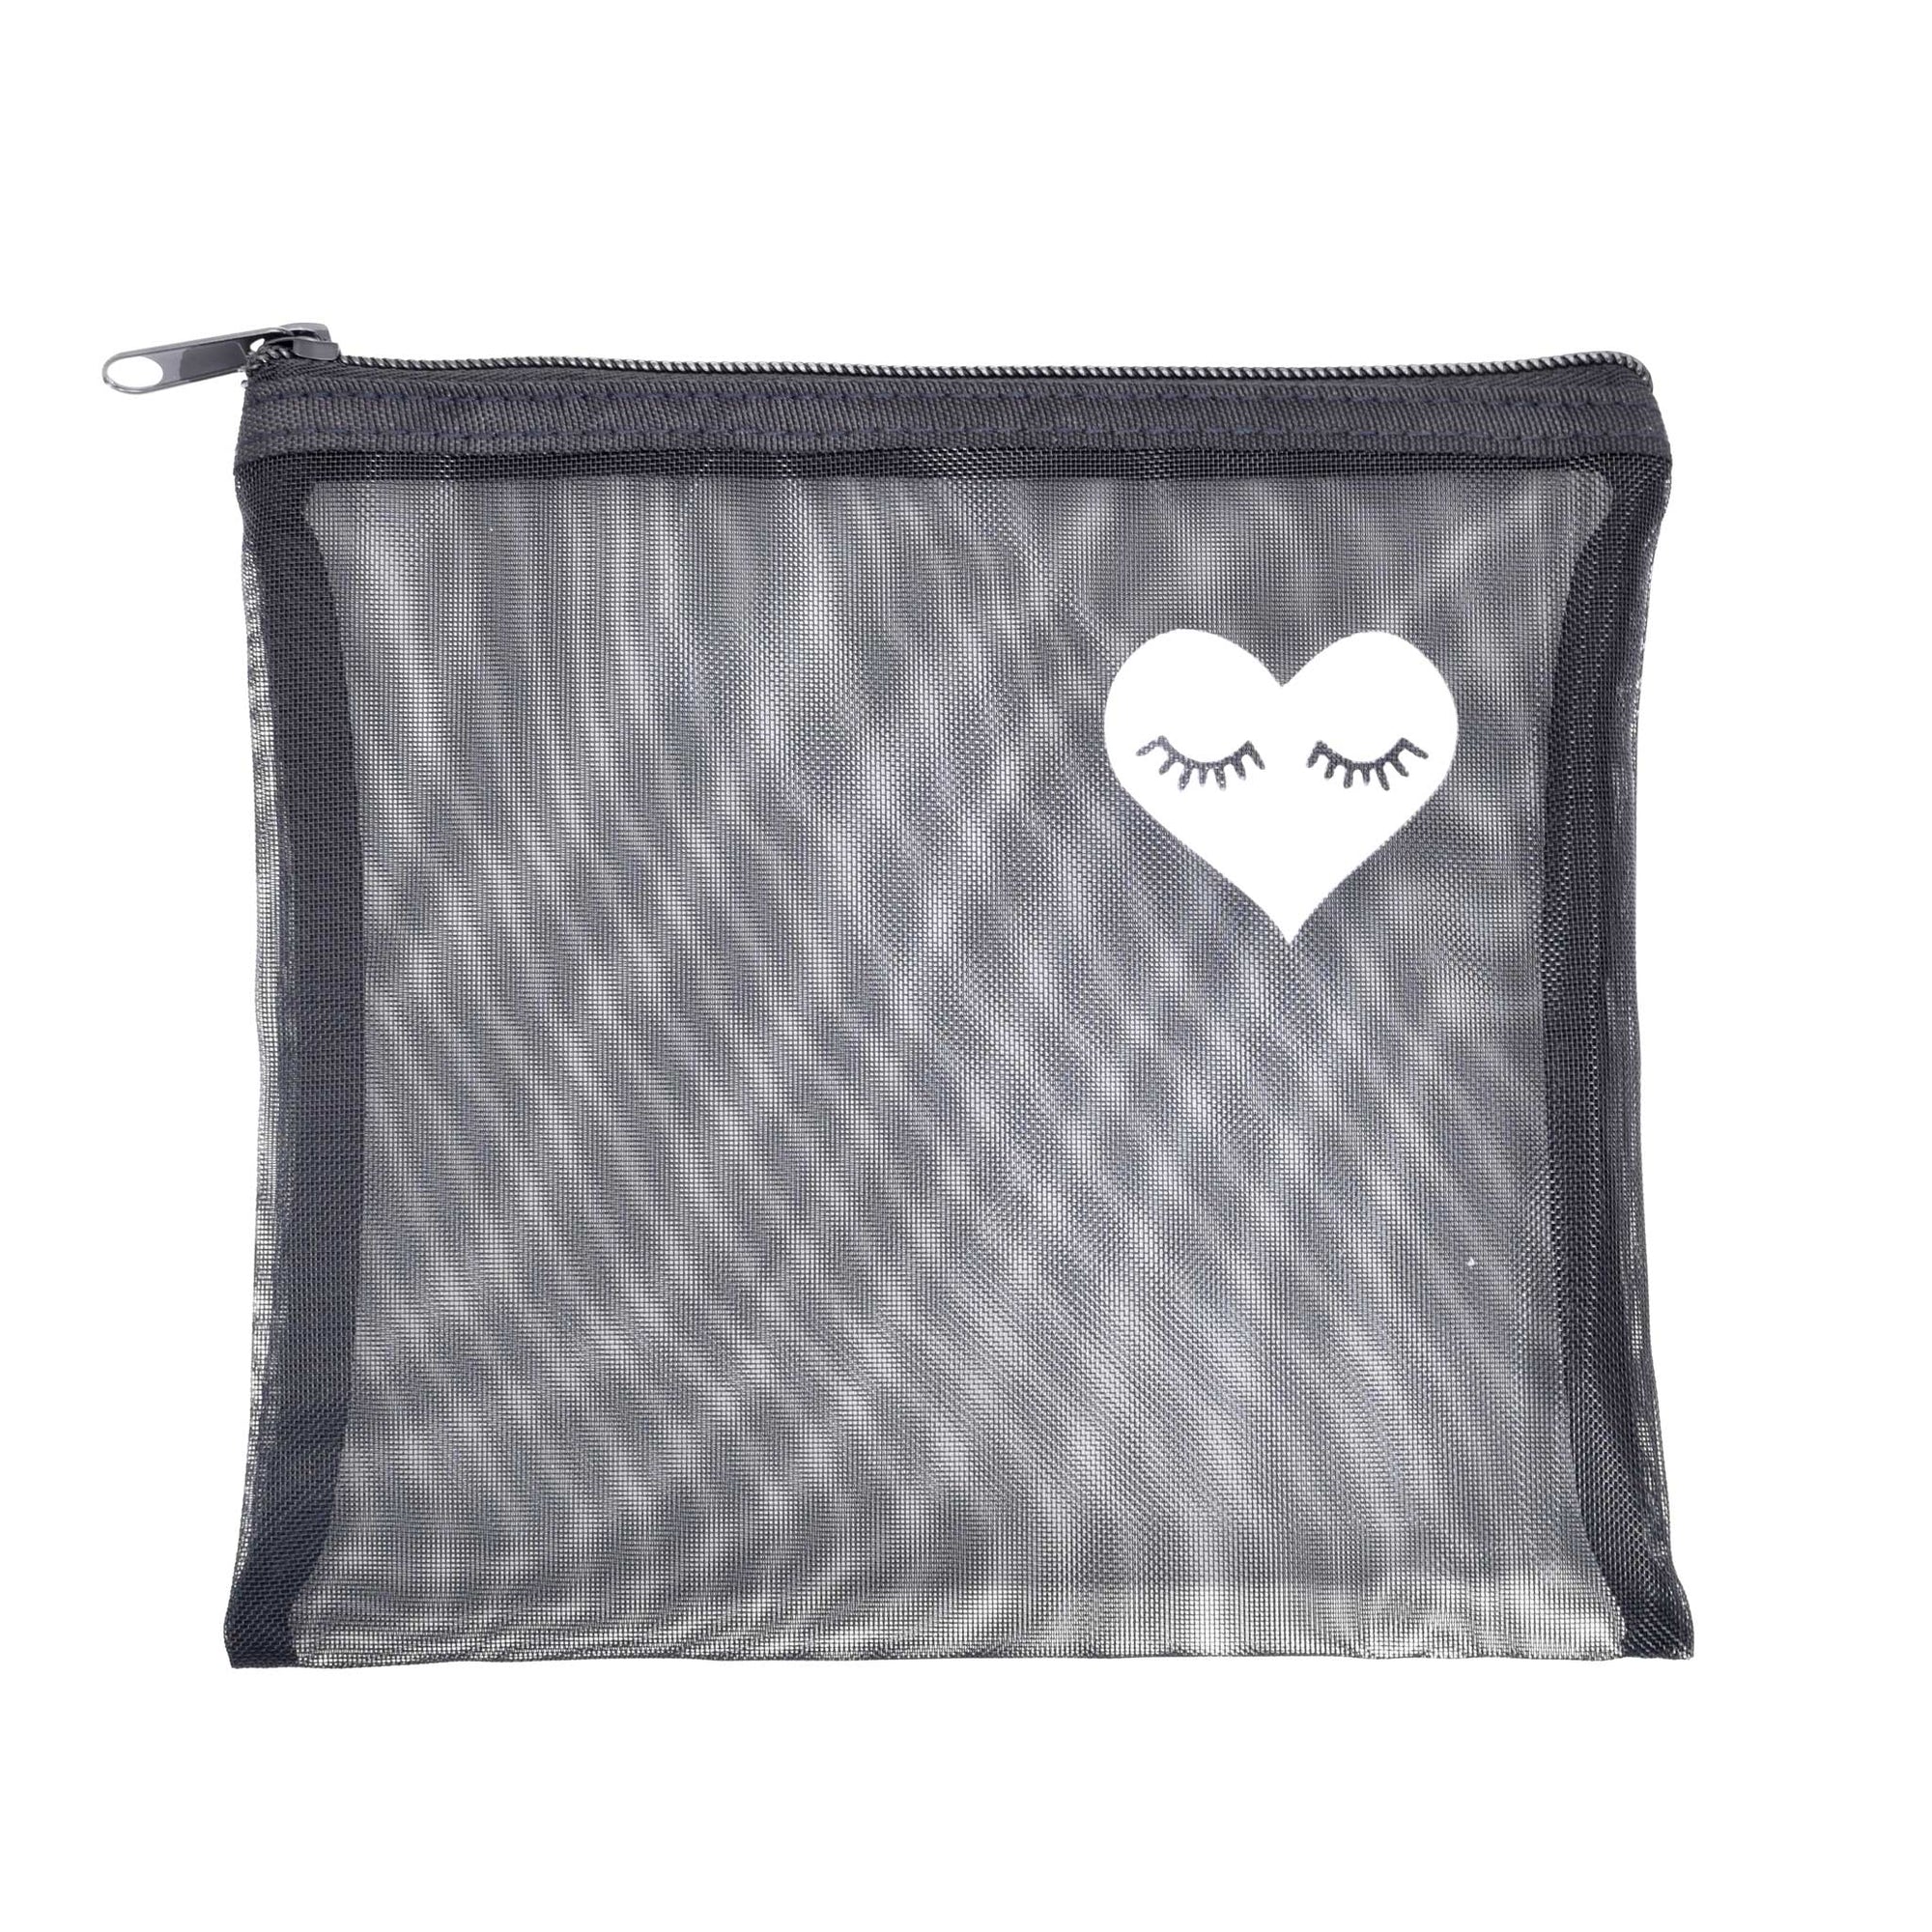 New arrivals include this mesh aftercare bag with heart design 